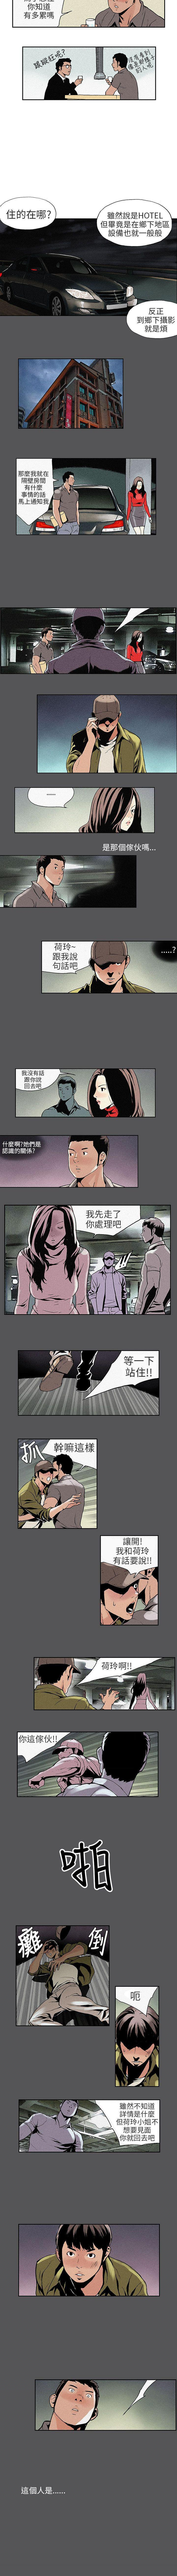 Prostitute 醜聞第三季 1-16 Family Taboo - Page 6